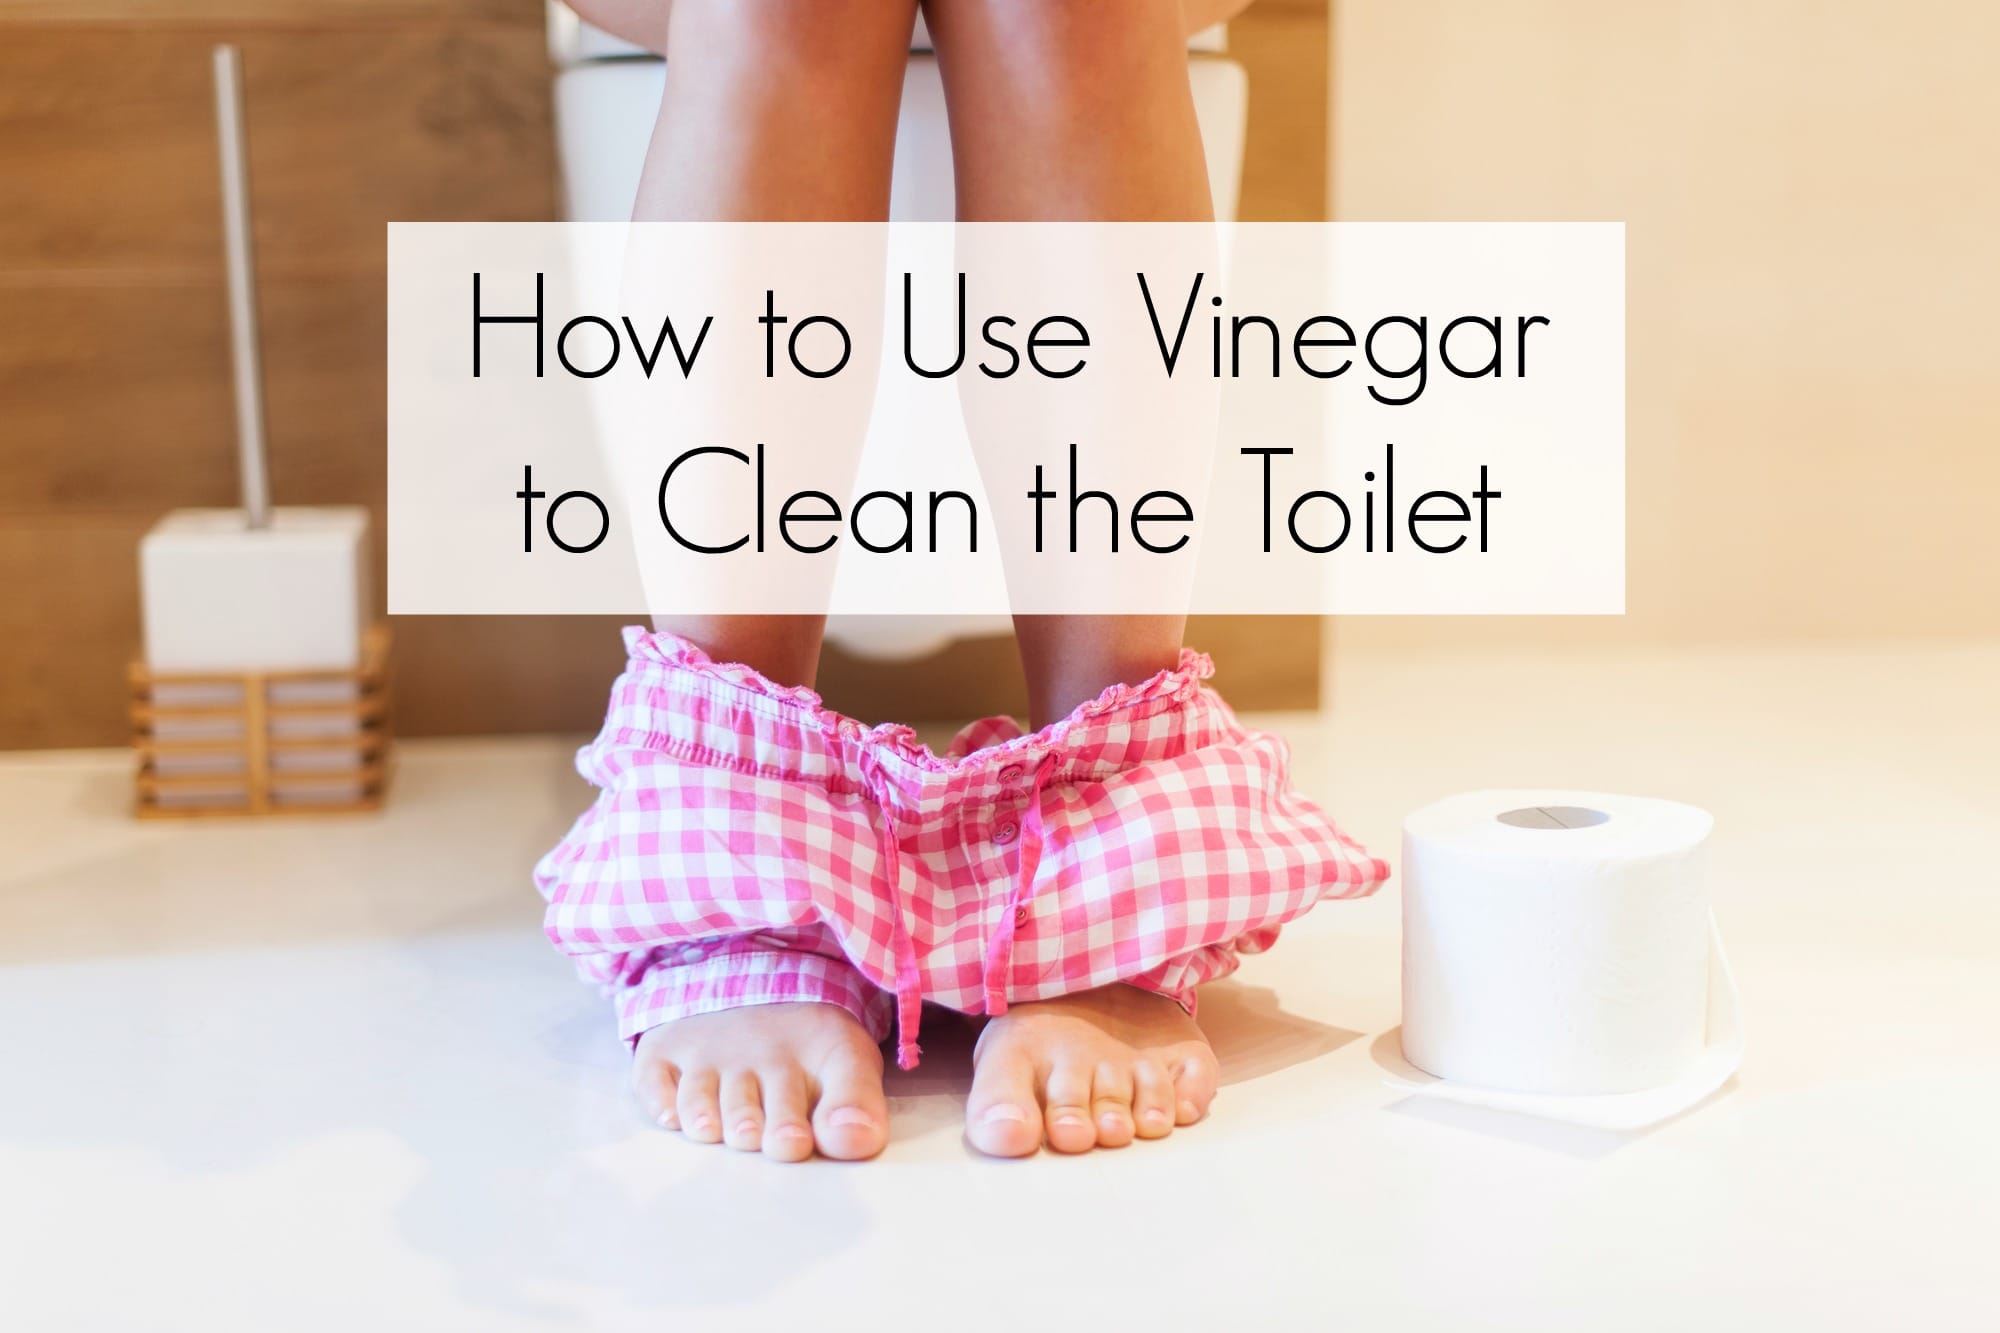 How to Use Vinegar to Clean the Toilet